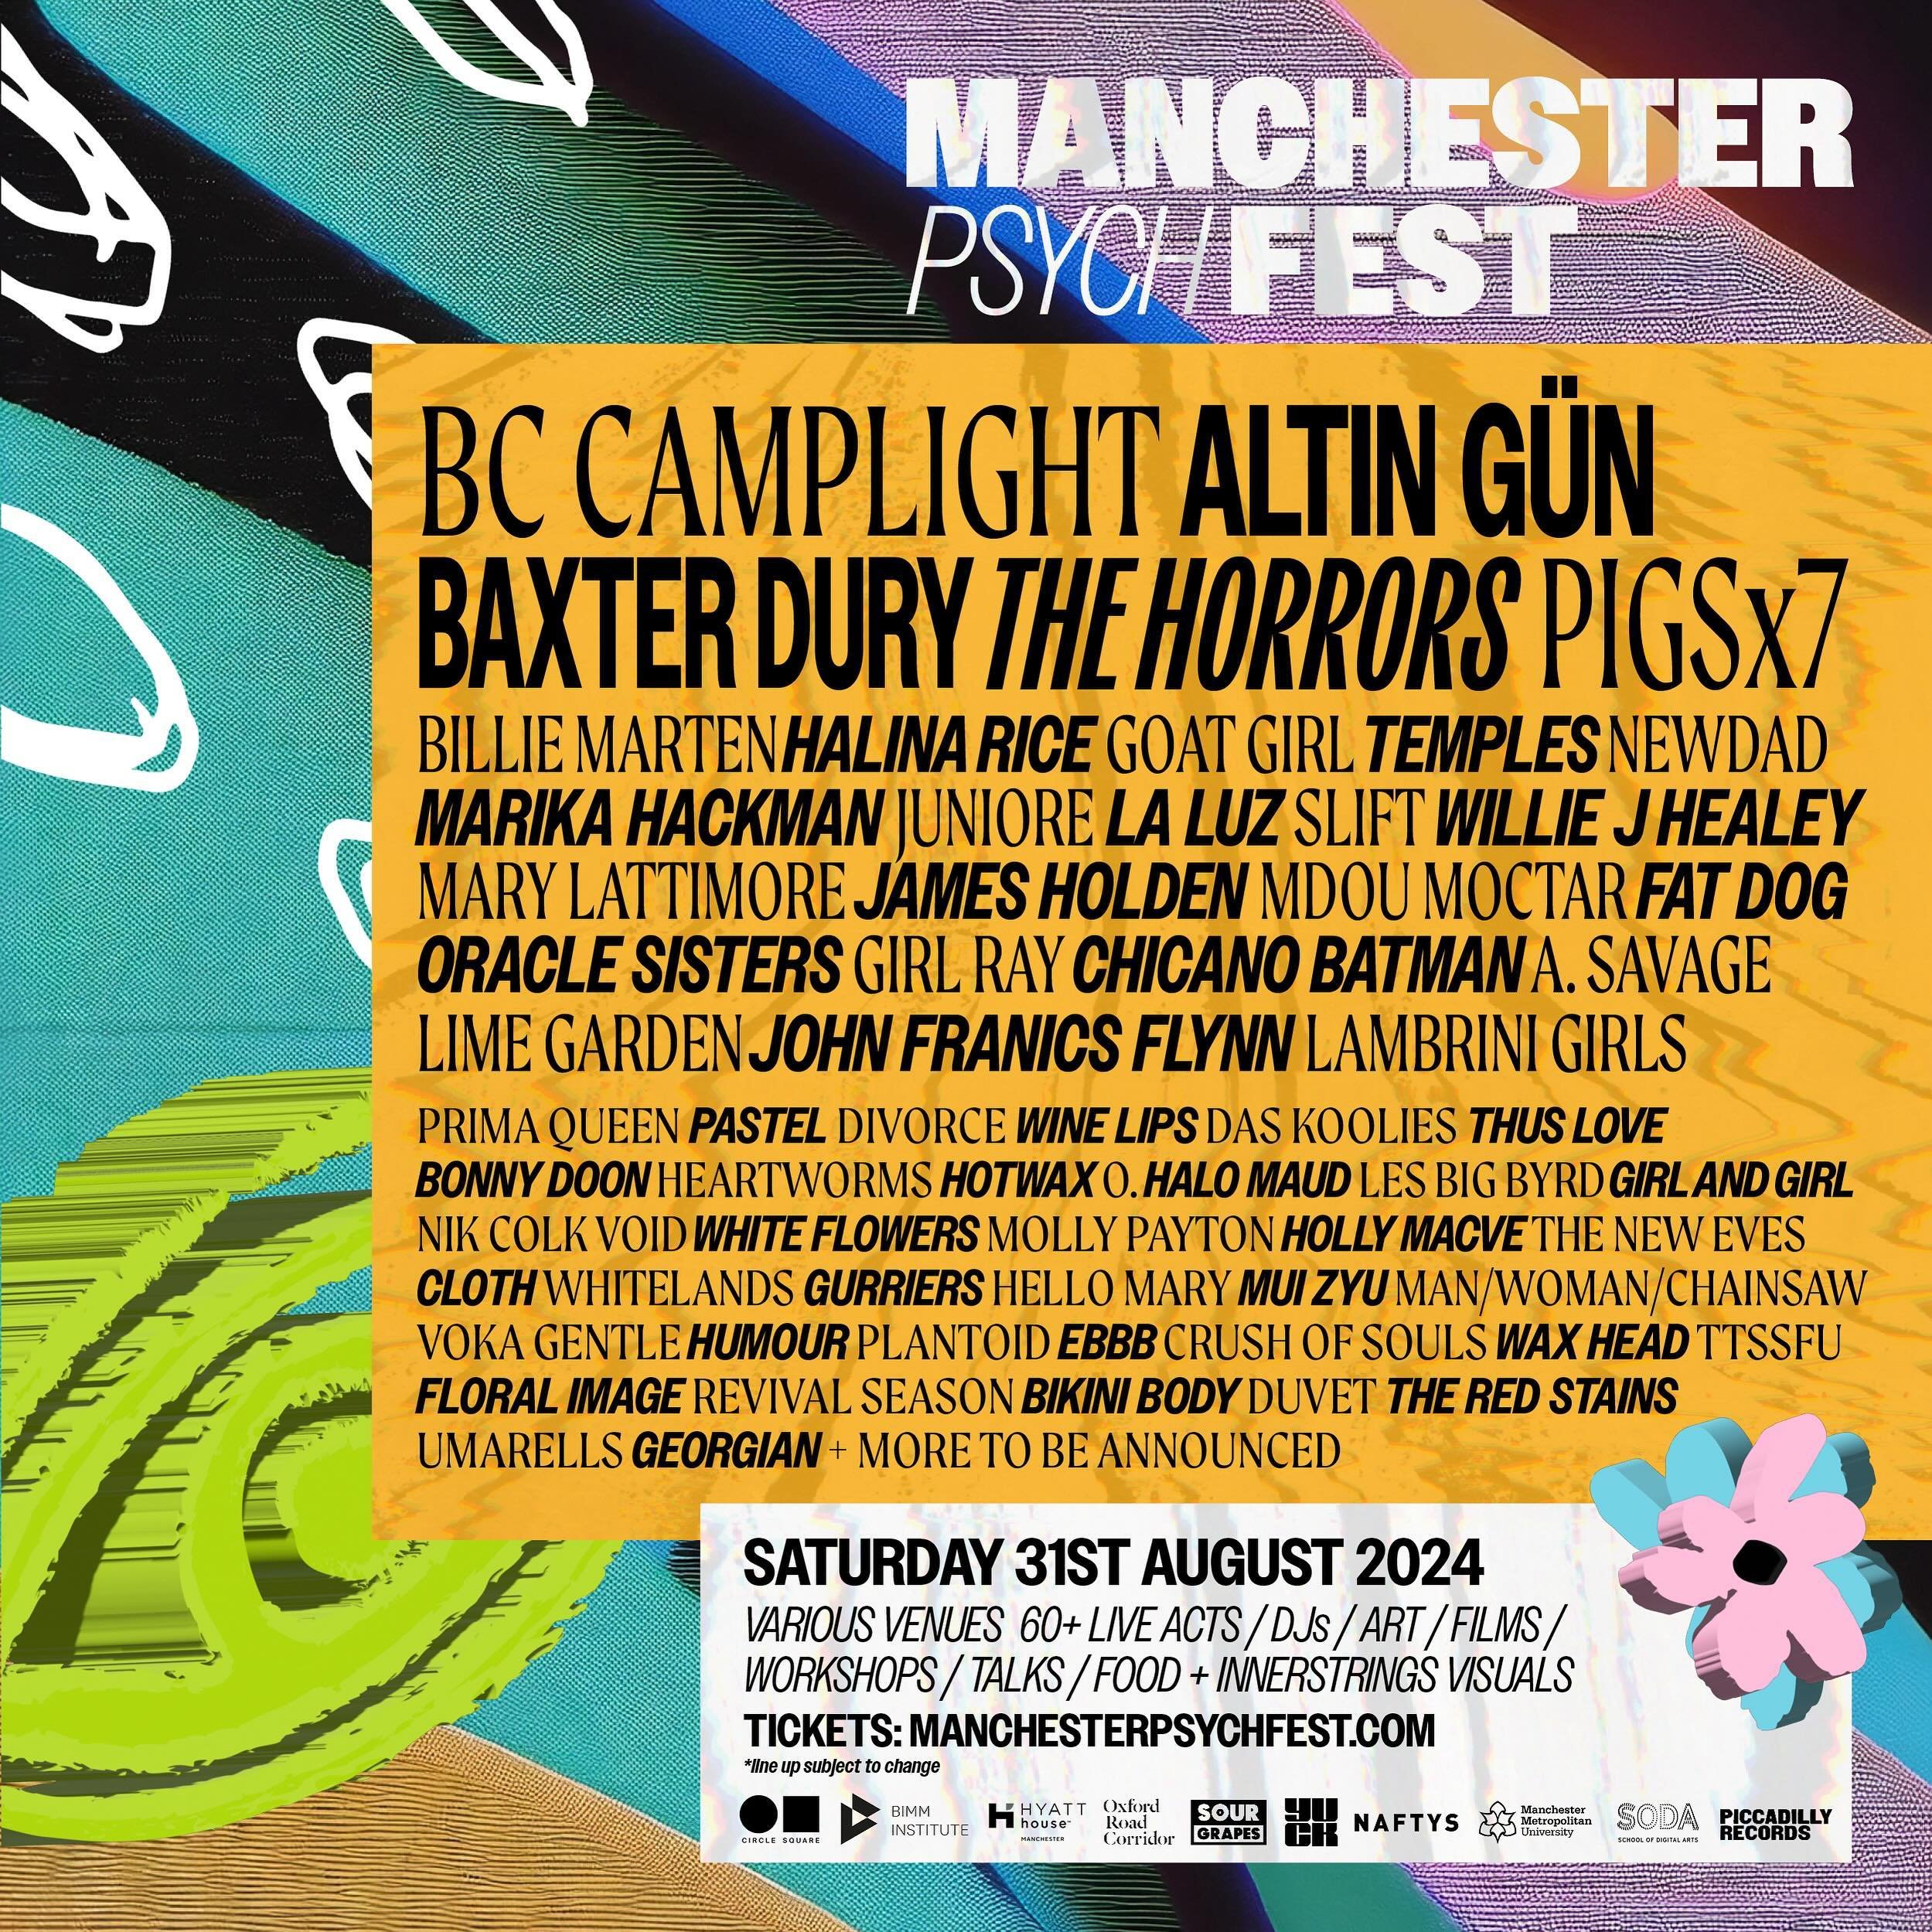 Following a sold out show at @alberthallmcr in 2023, @bccamplight returns to headline @manchesterpsychfest this August ⚡️⚡️⚡️